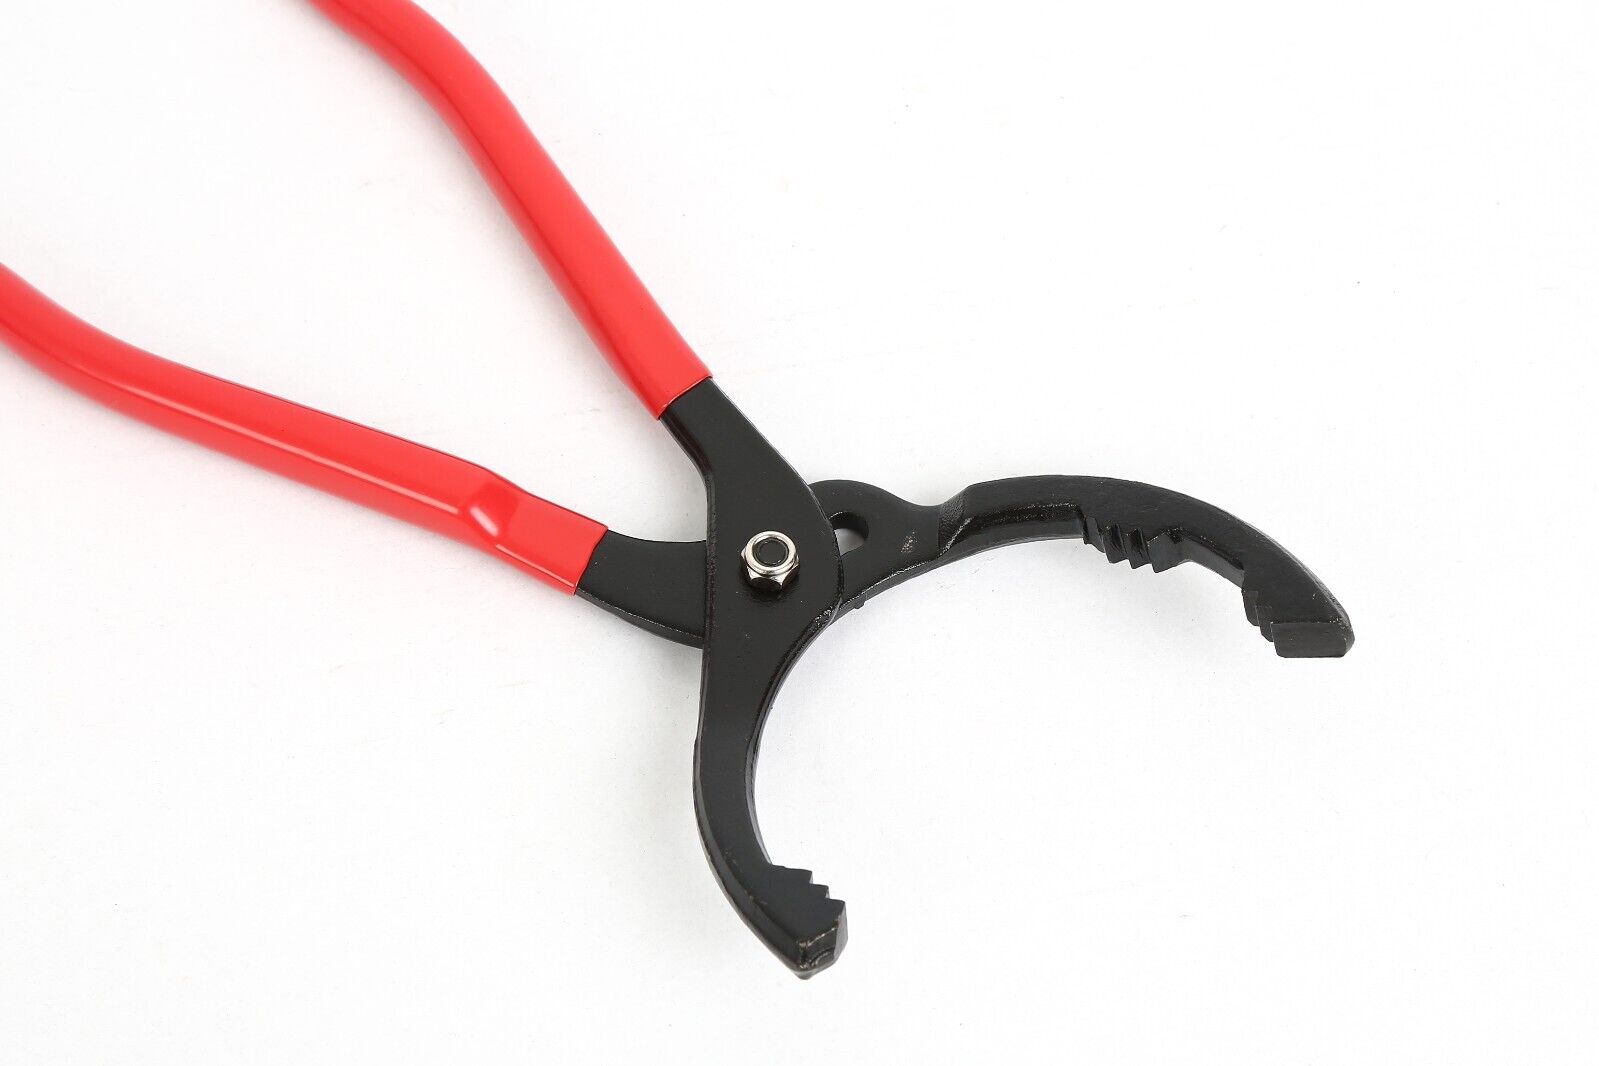 Great Choice Products Adjustable Oil Filter Wrench And Oil Filter Pliers Set W/3-Jaw Oil Filter Wrench